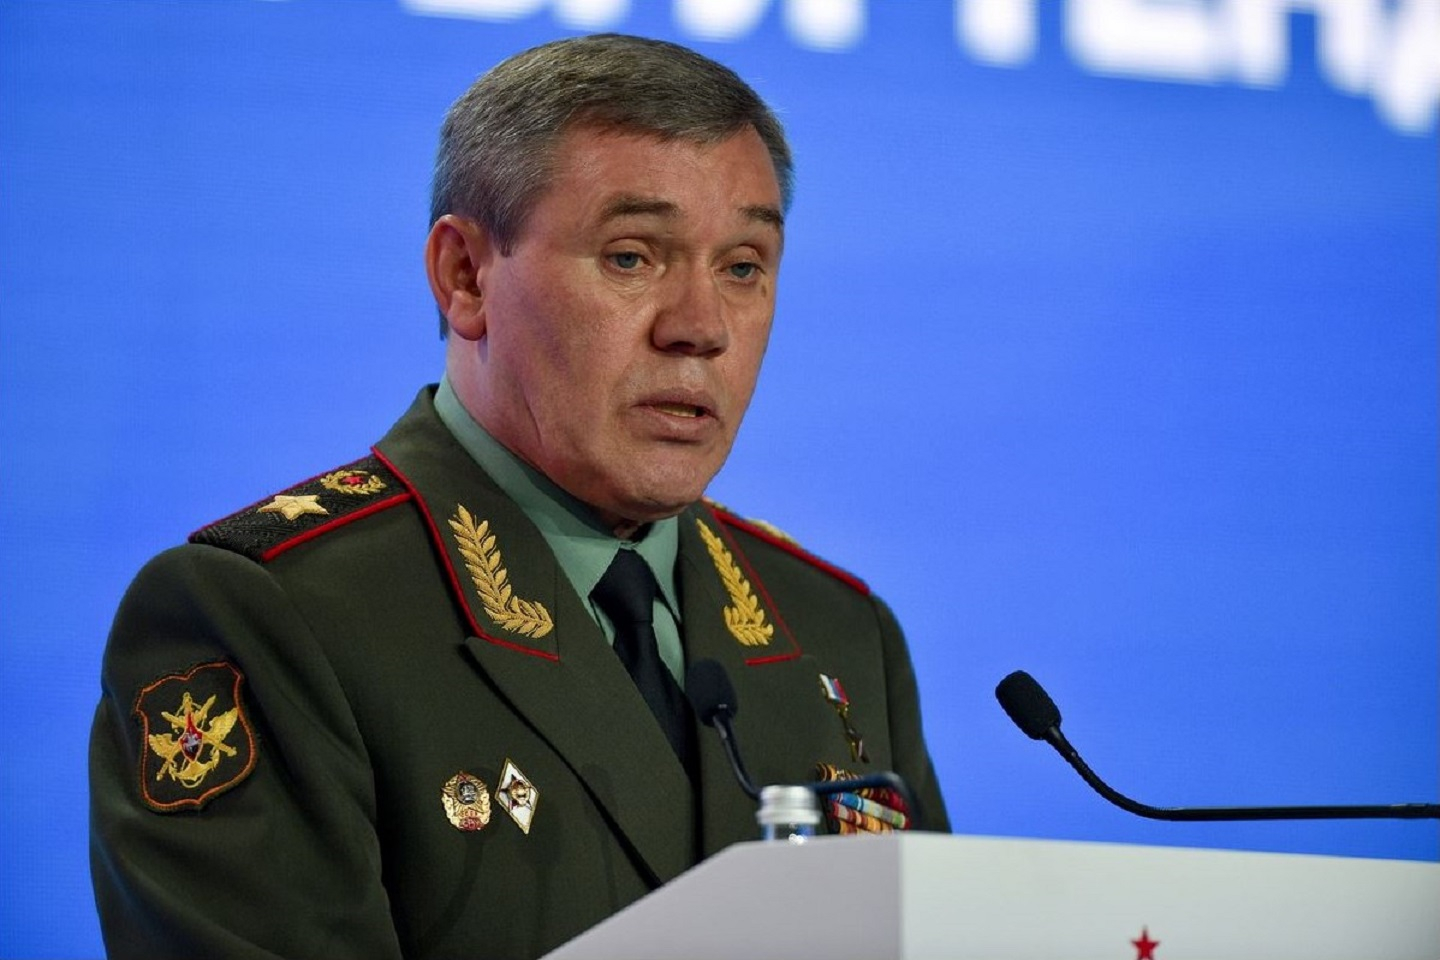 Valery Gerasimov, Chief of the General Staff of the Armed Forces of the Russian Federation / First Deputy Minister of Defence of the Russian Federation, General of the Army at the plenary sessions of the VIII Moscow Conference on International Security MCIS-2019.